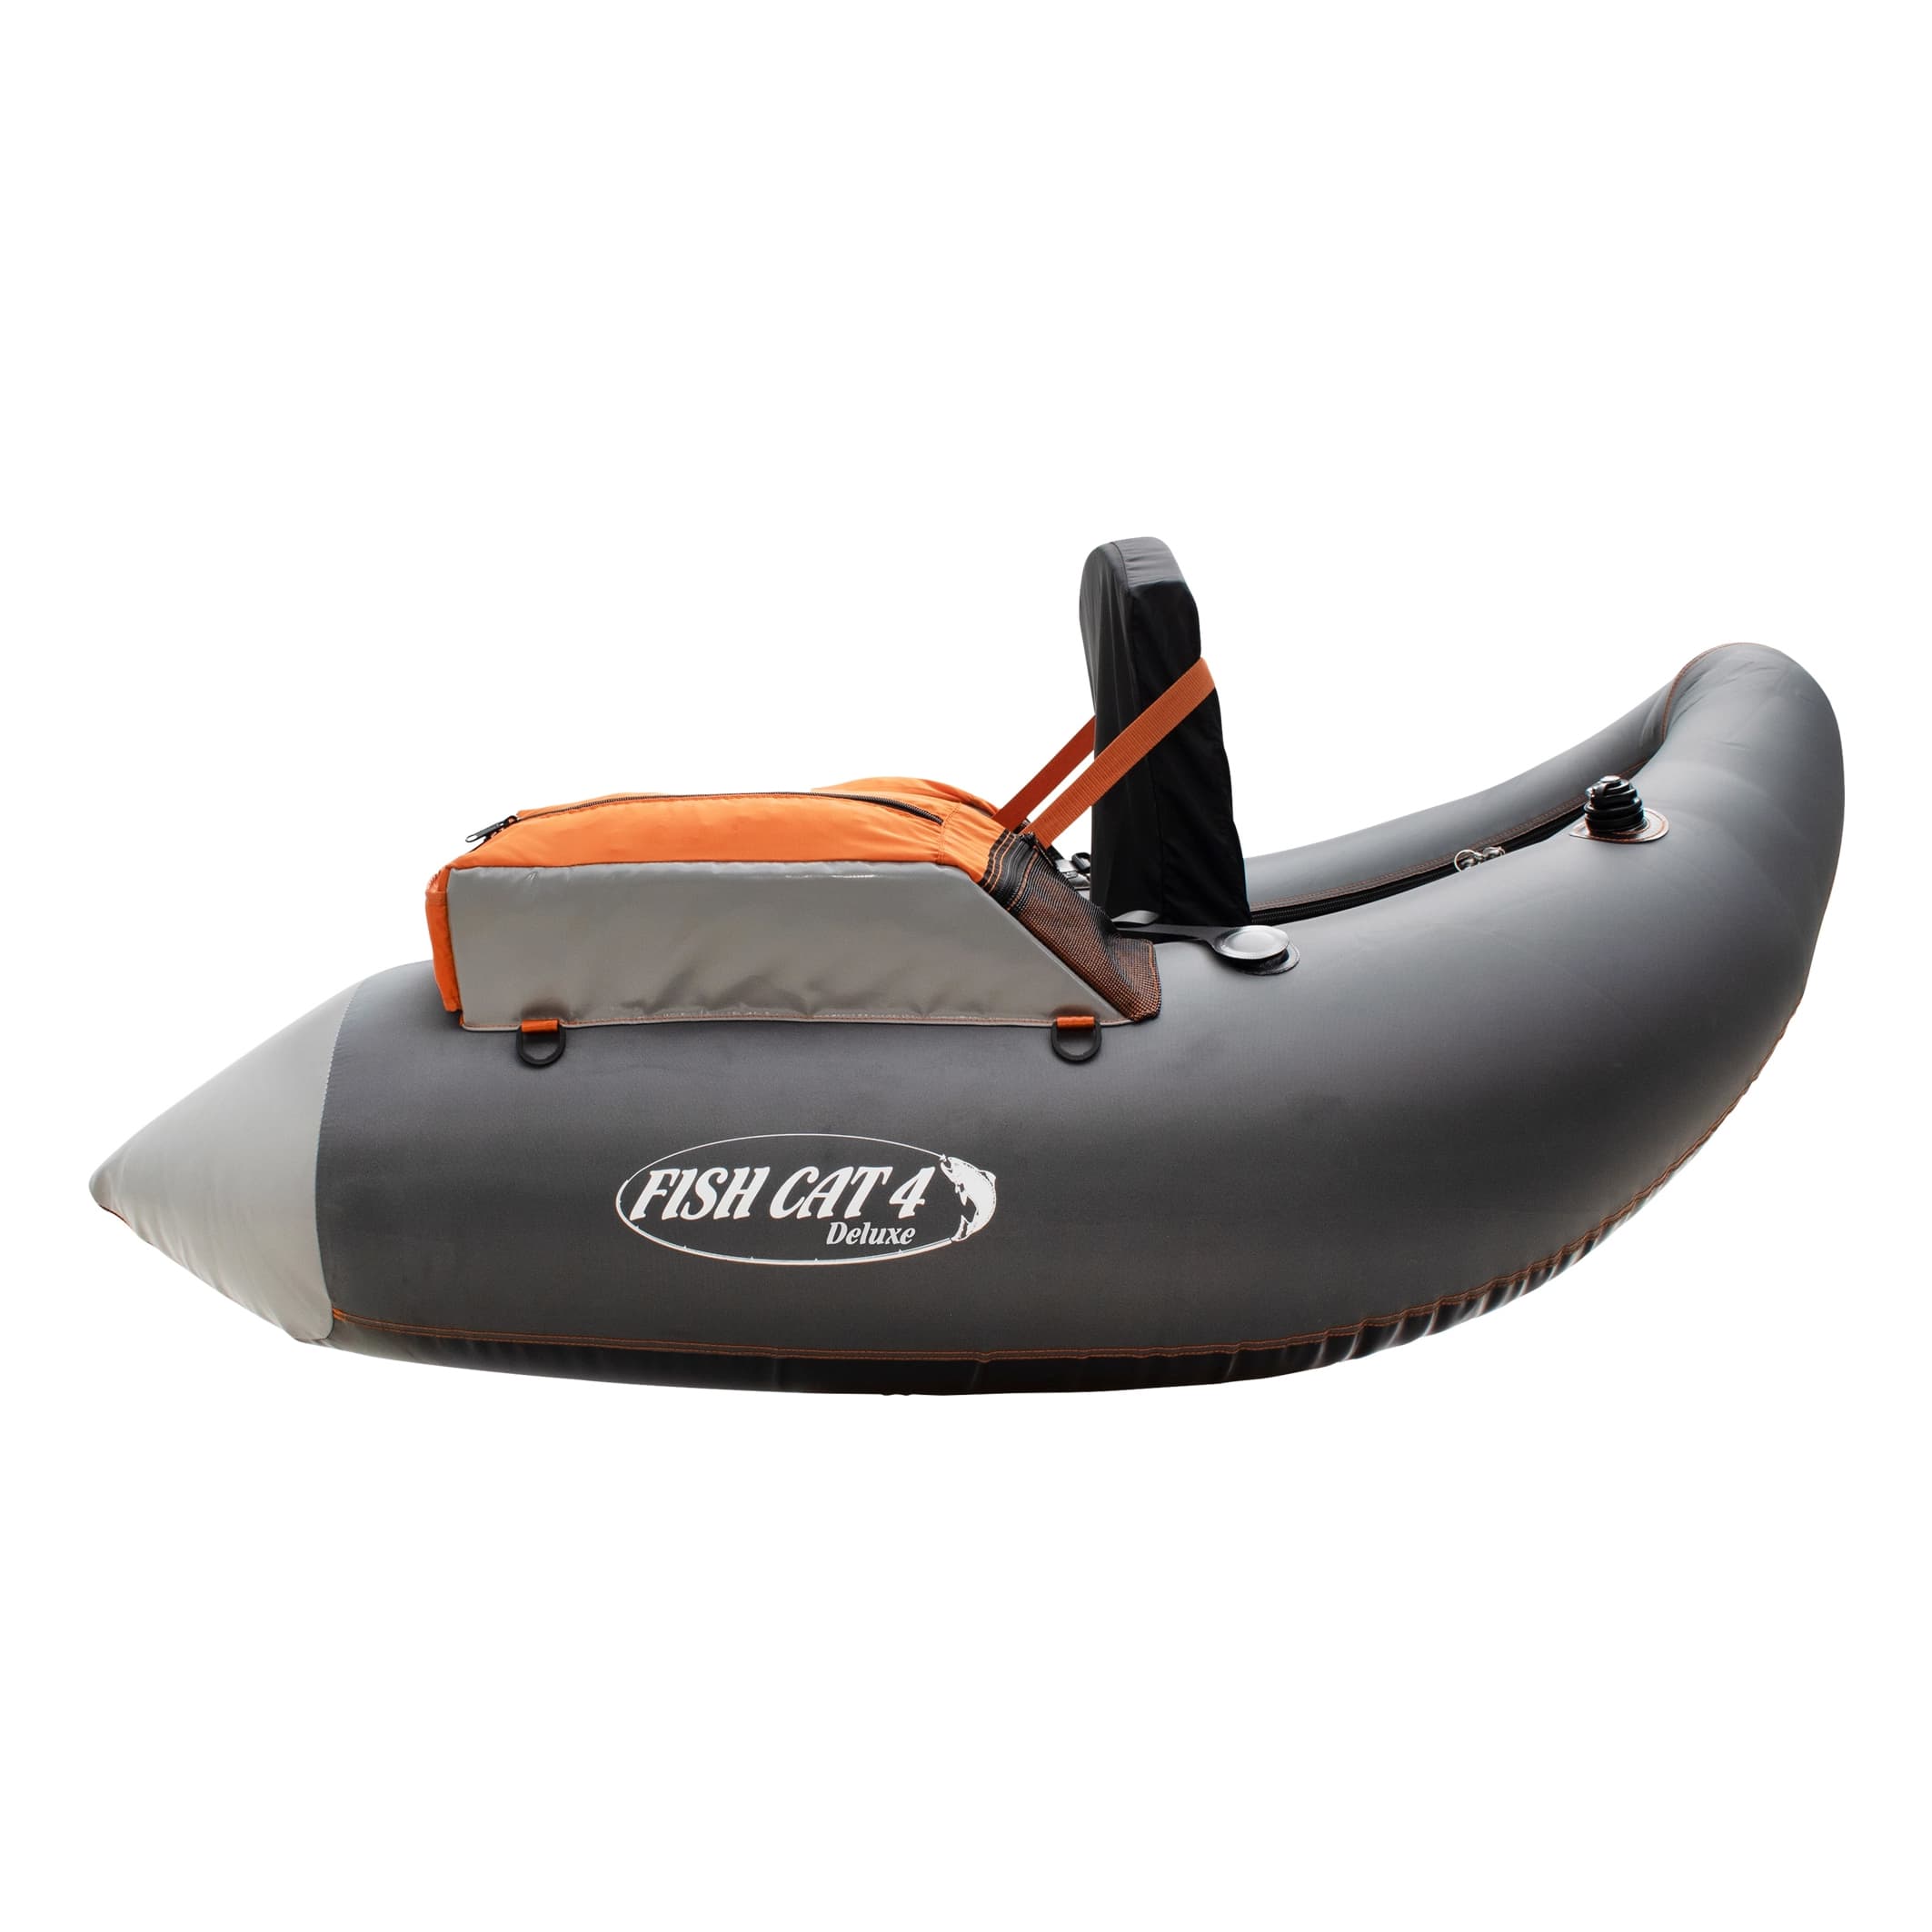 Outcast Fish Cat® 4 Deluxe LCS Float Tube